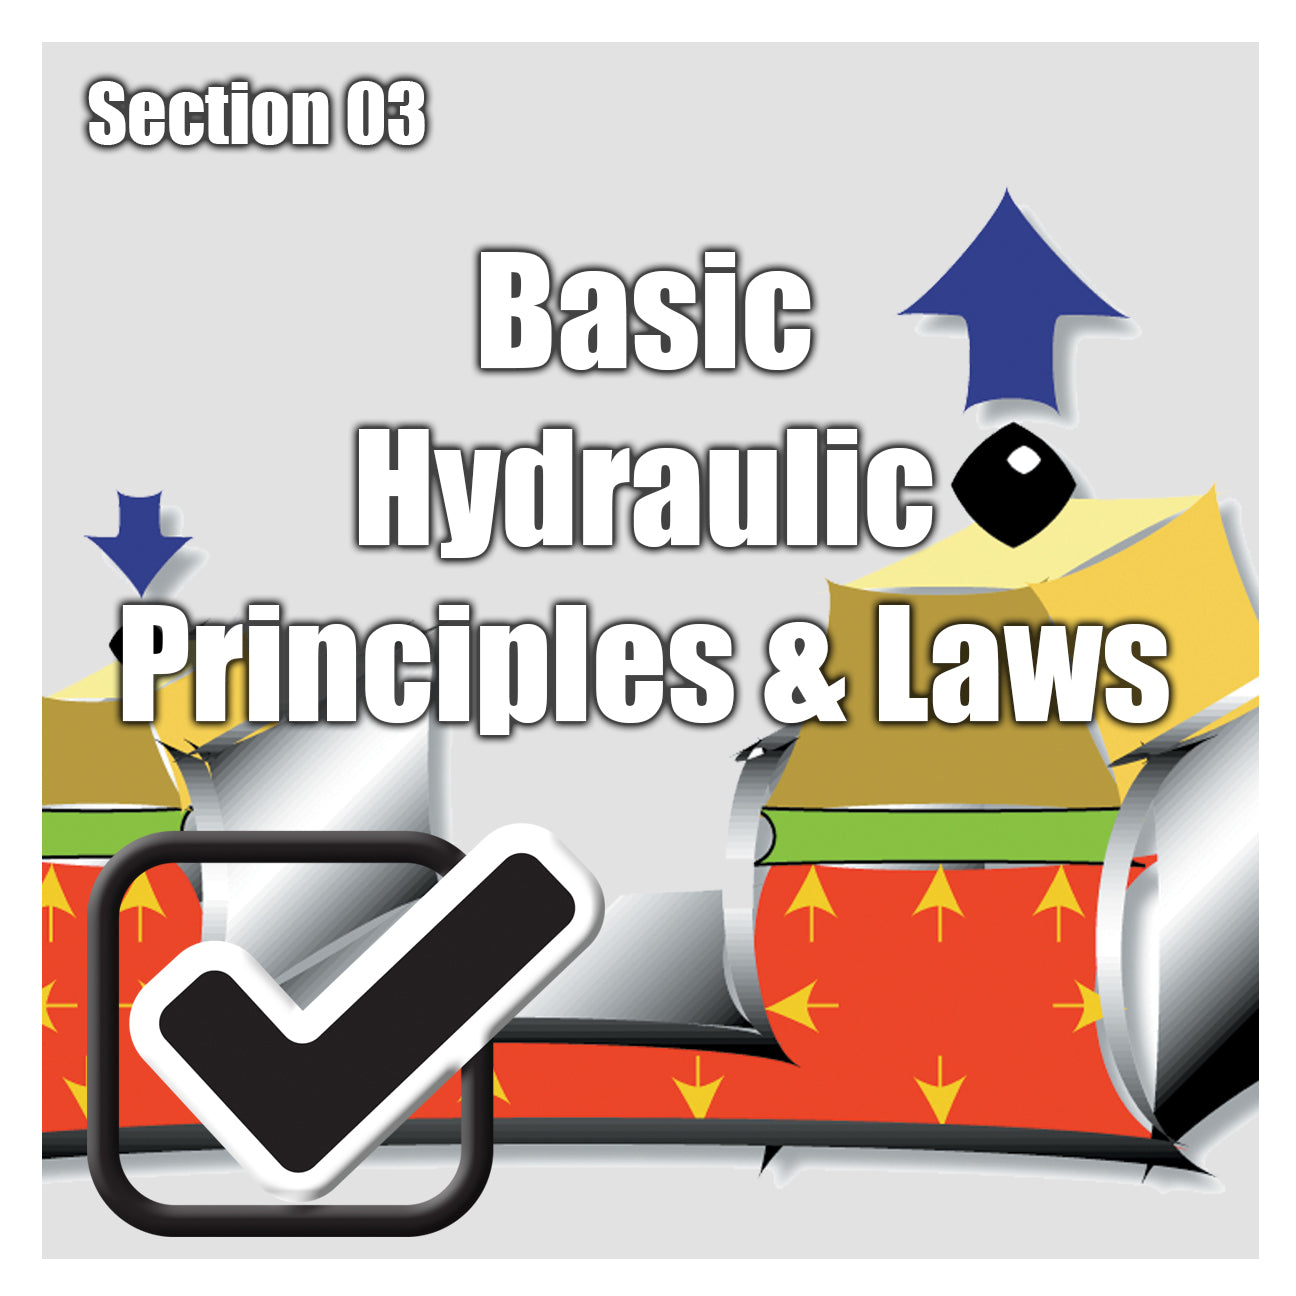 PH Section 03 - Basic Hydraulic Principles & Laws - Competency Test